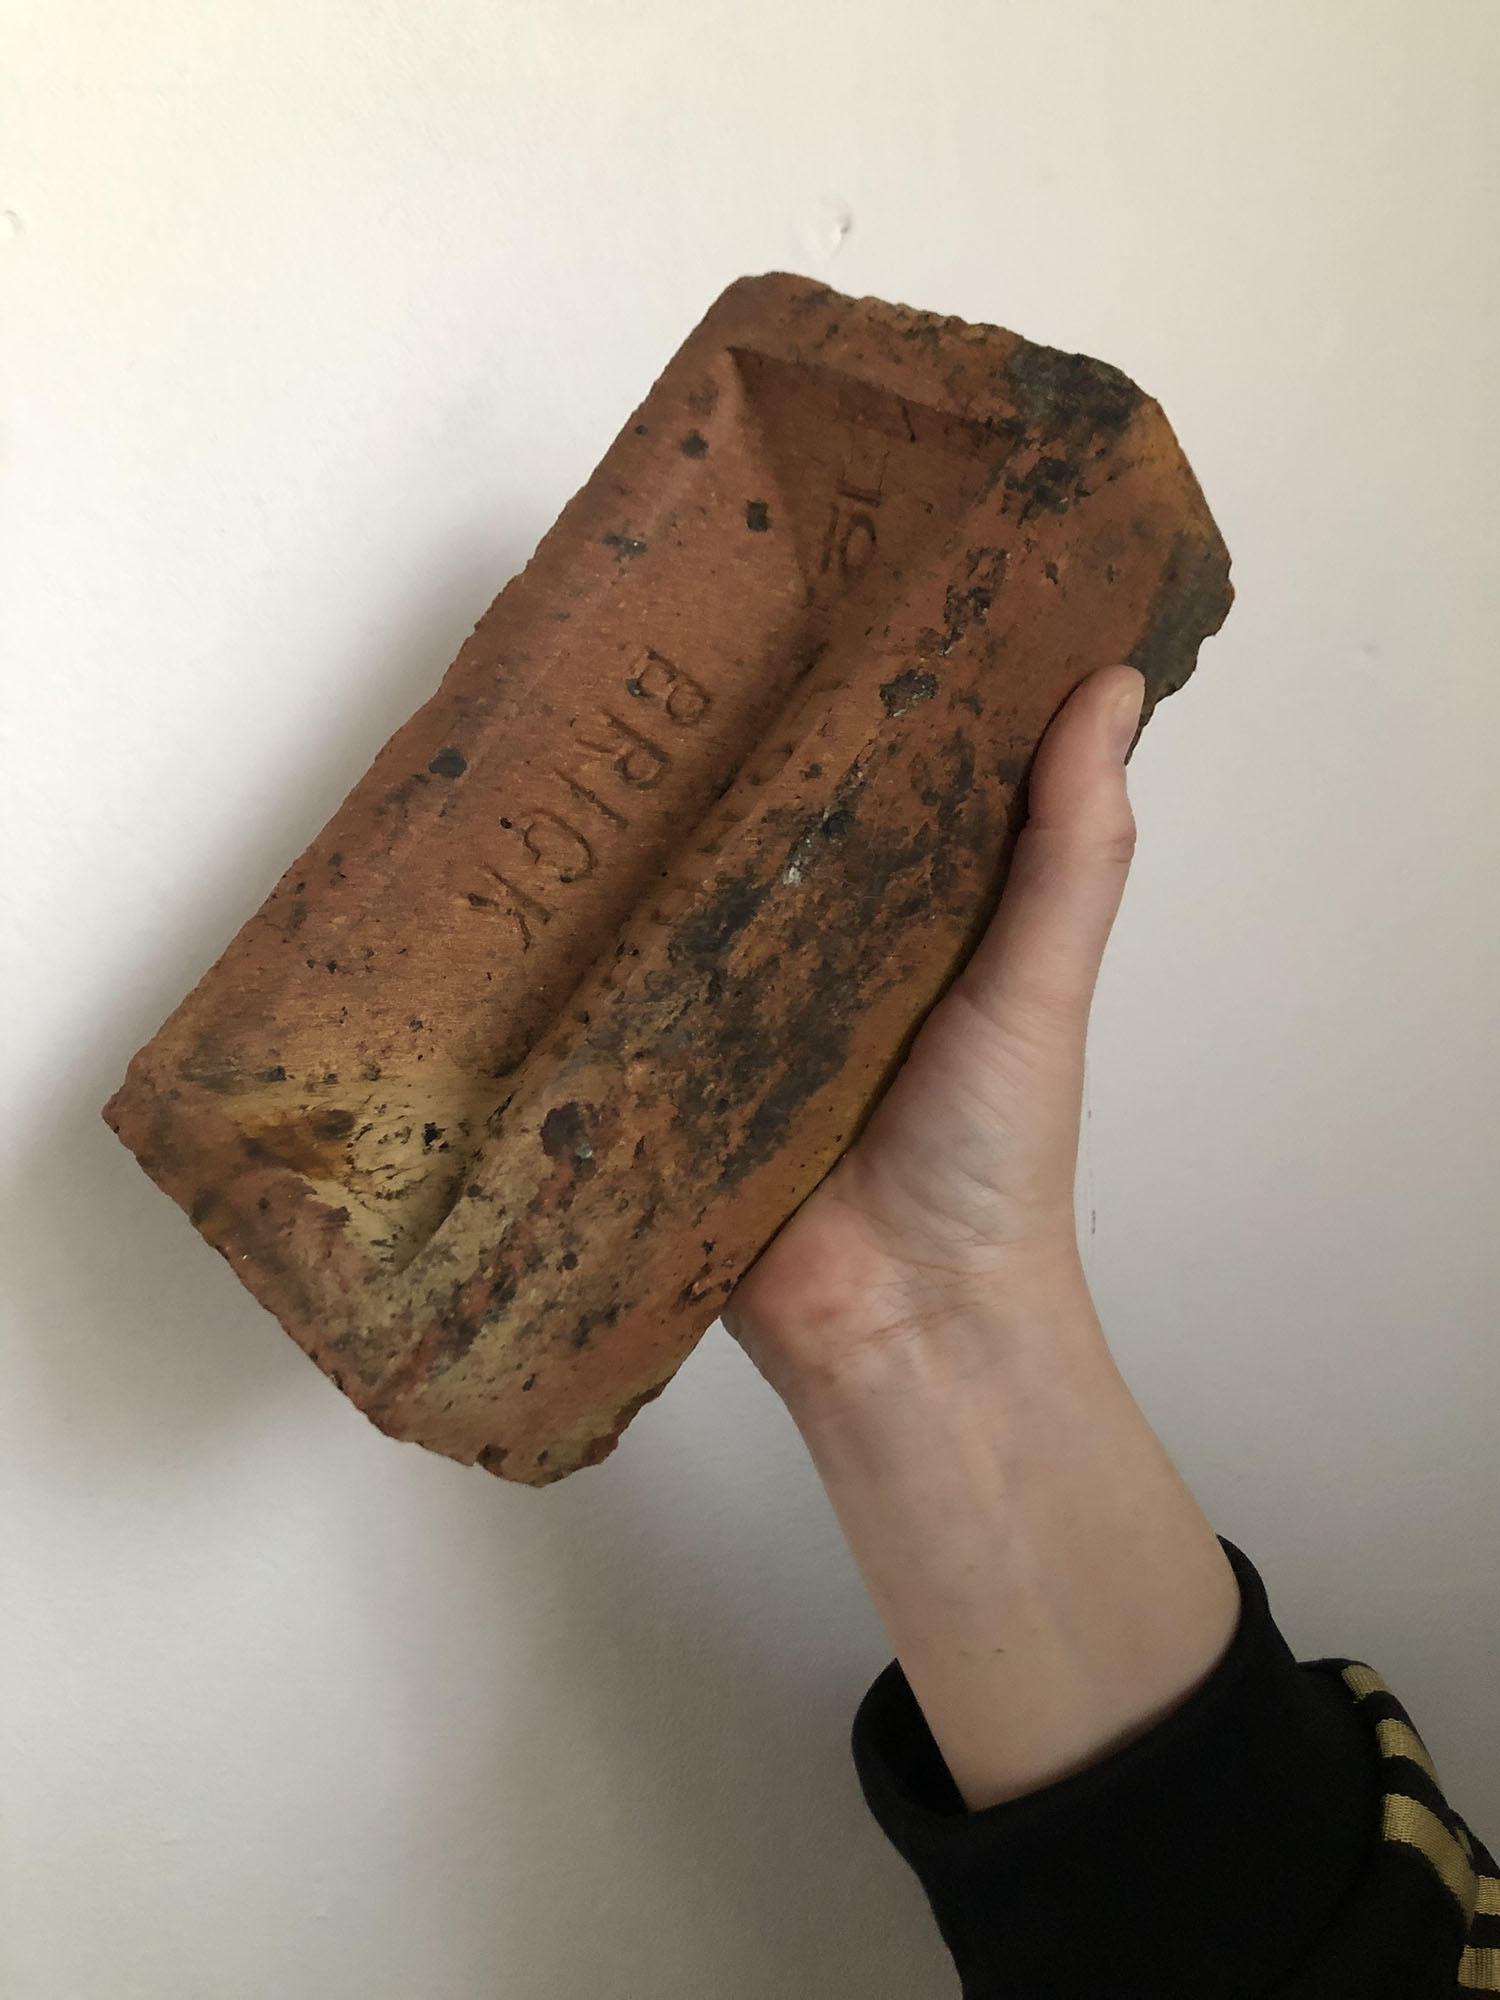 Made from this Land Emma Edmondson. A hand holding a London Brick brick in the air.